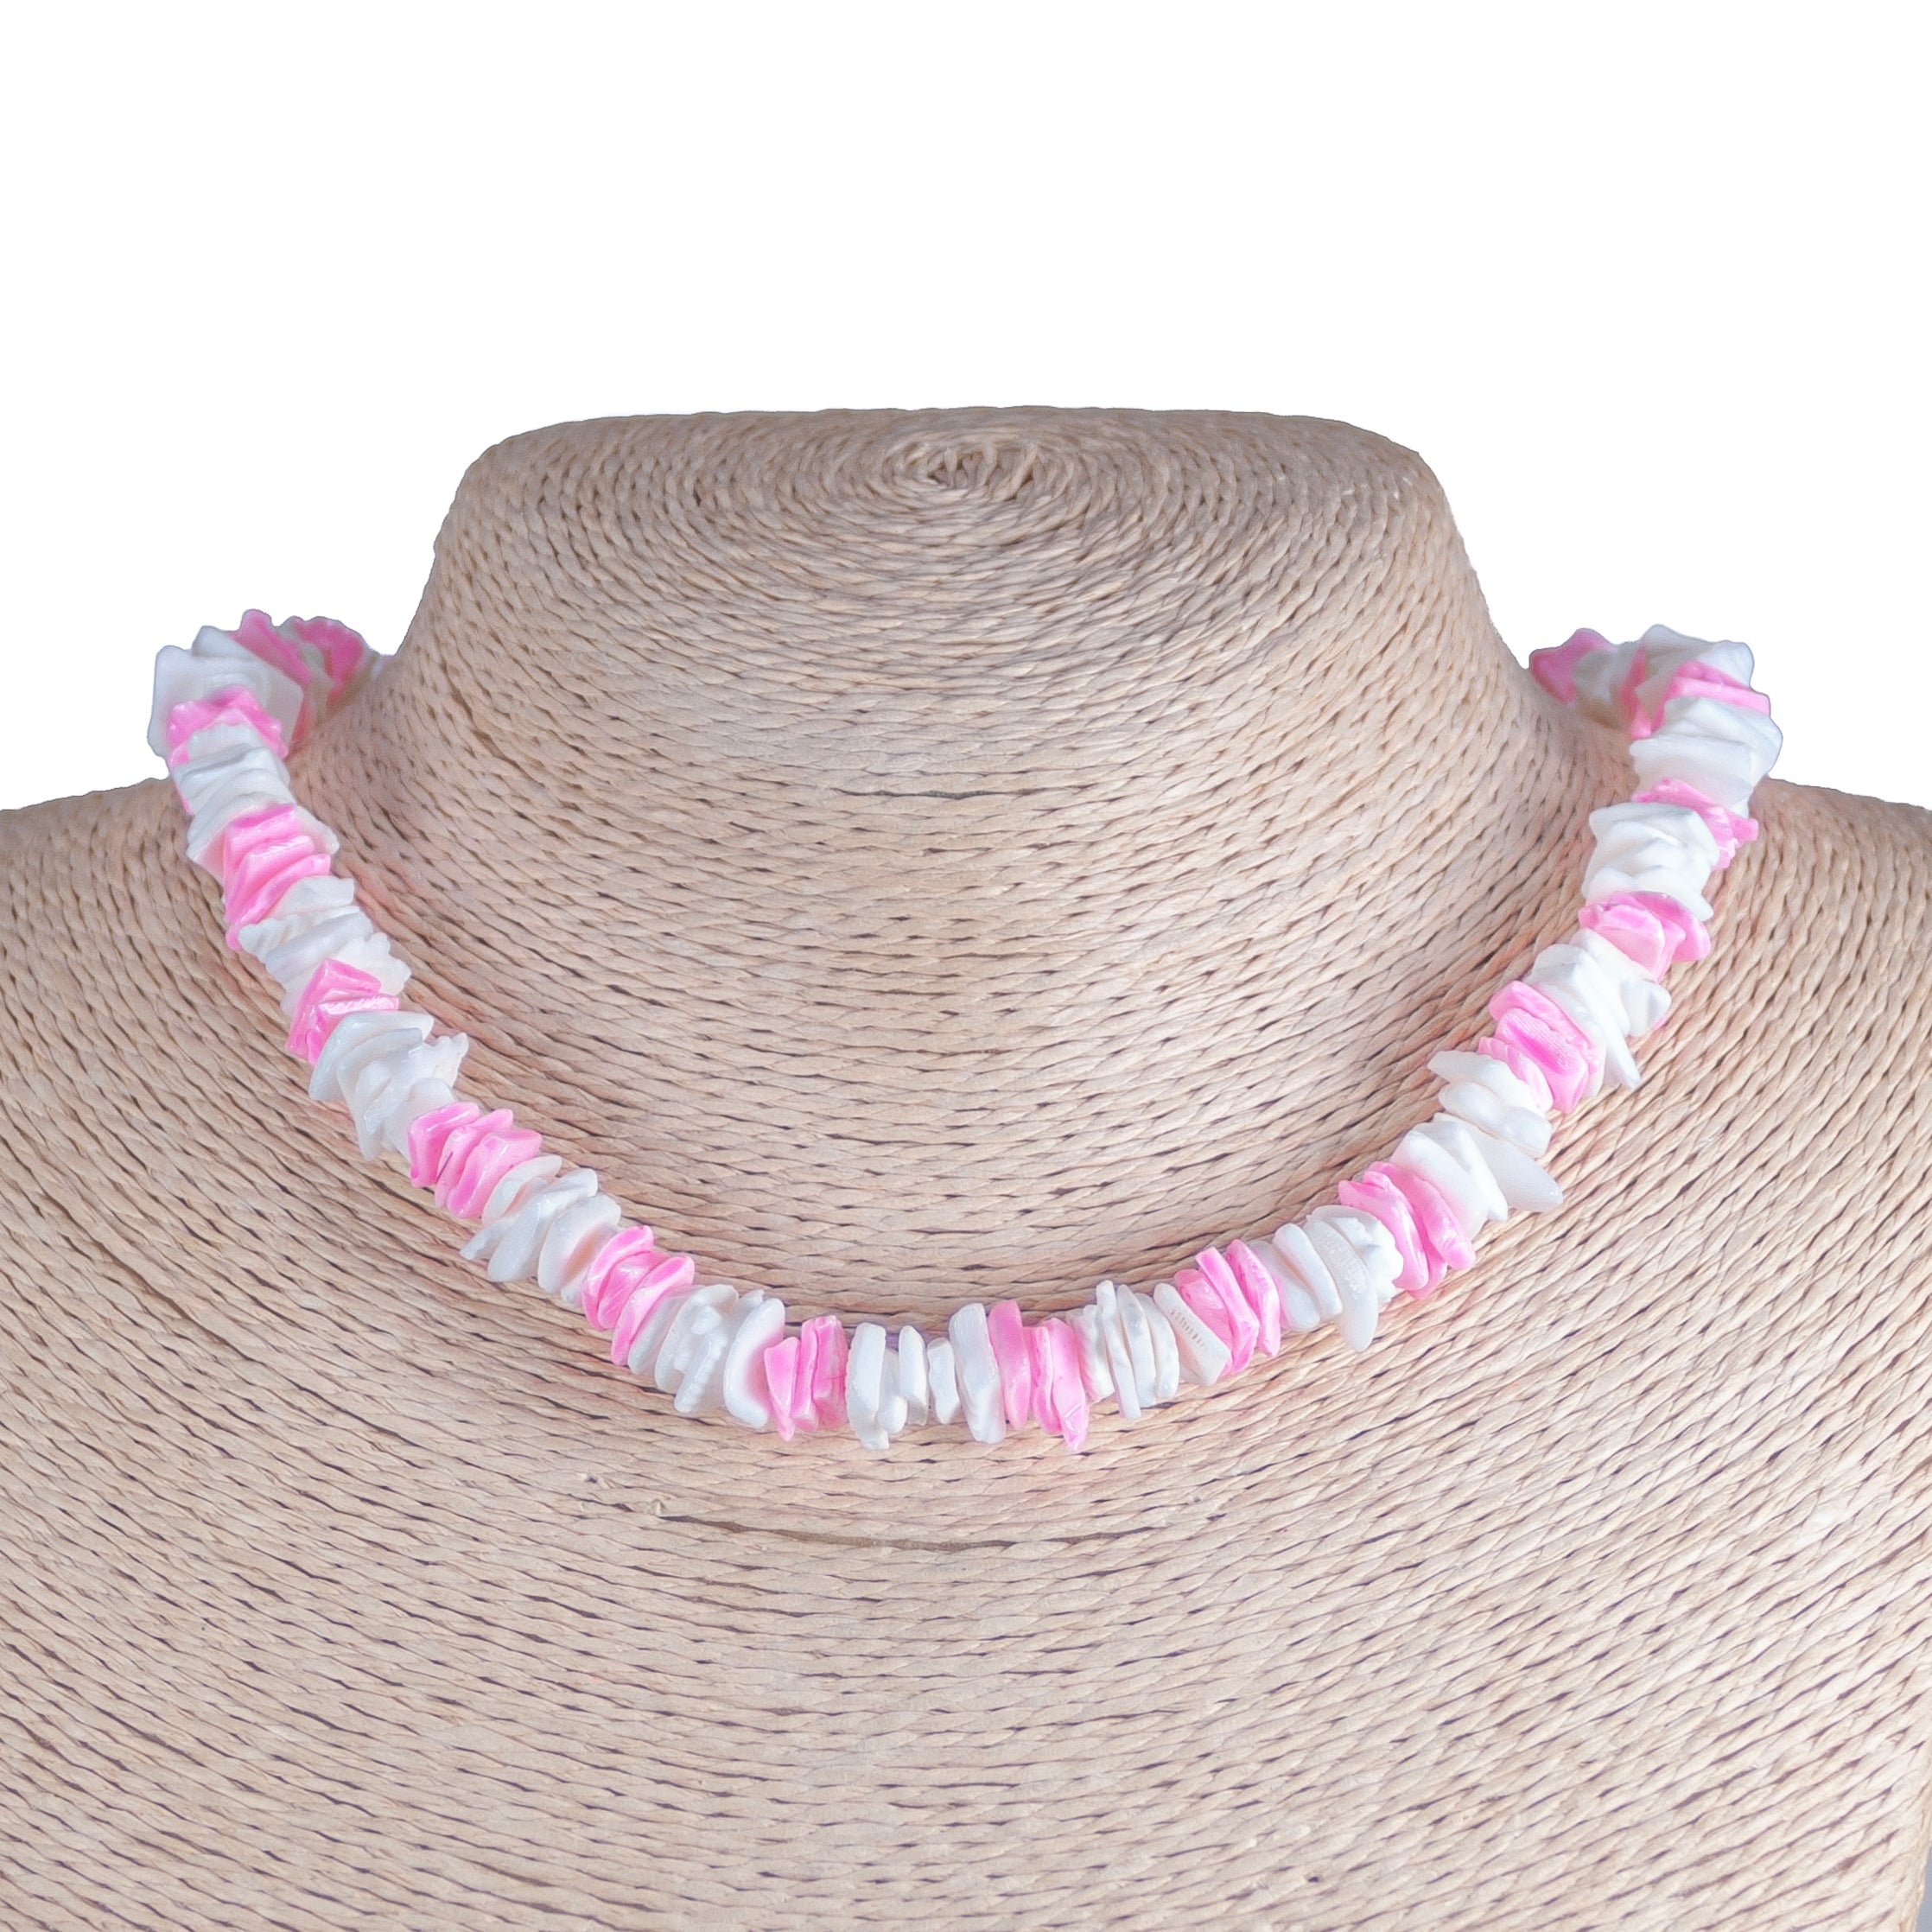 Pink and White Puka Chip Shells Necklace and Anklet Set